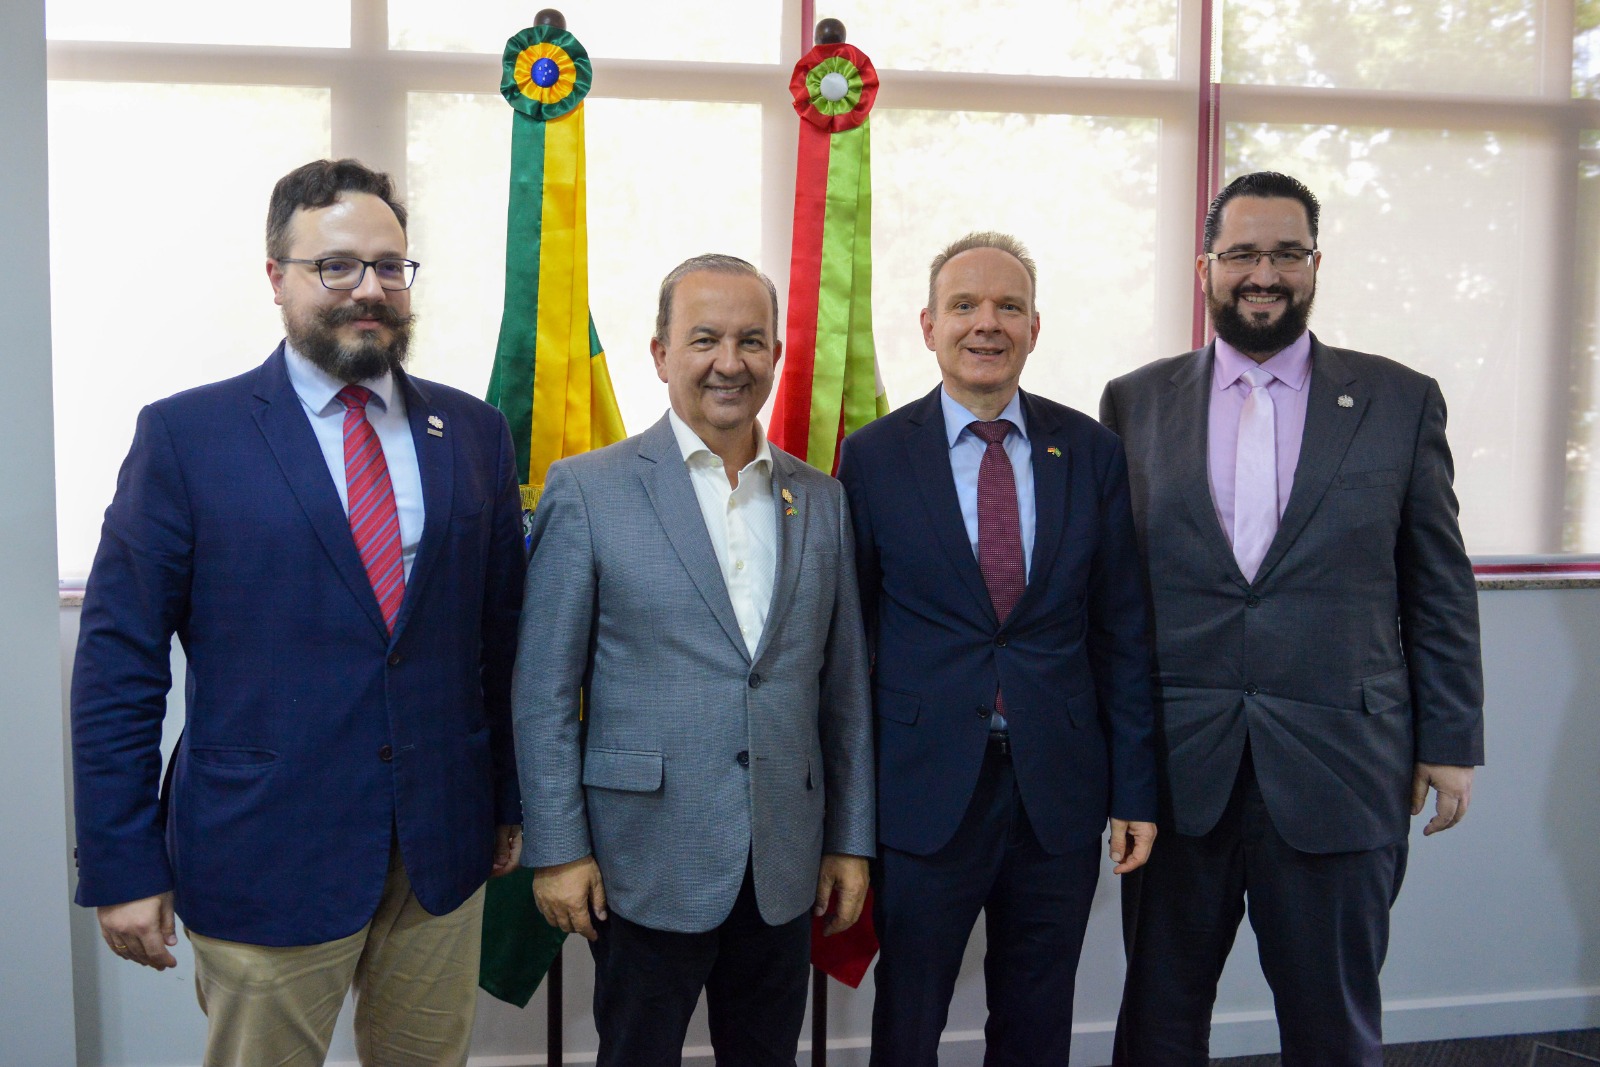 During a visit by the consul general, the governor highlights actions for the bicentennial of German immigration and defends an increase in exports to Germany